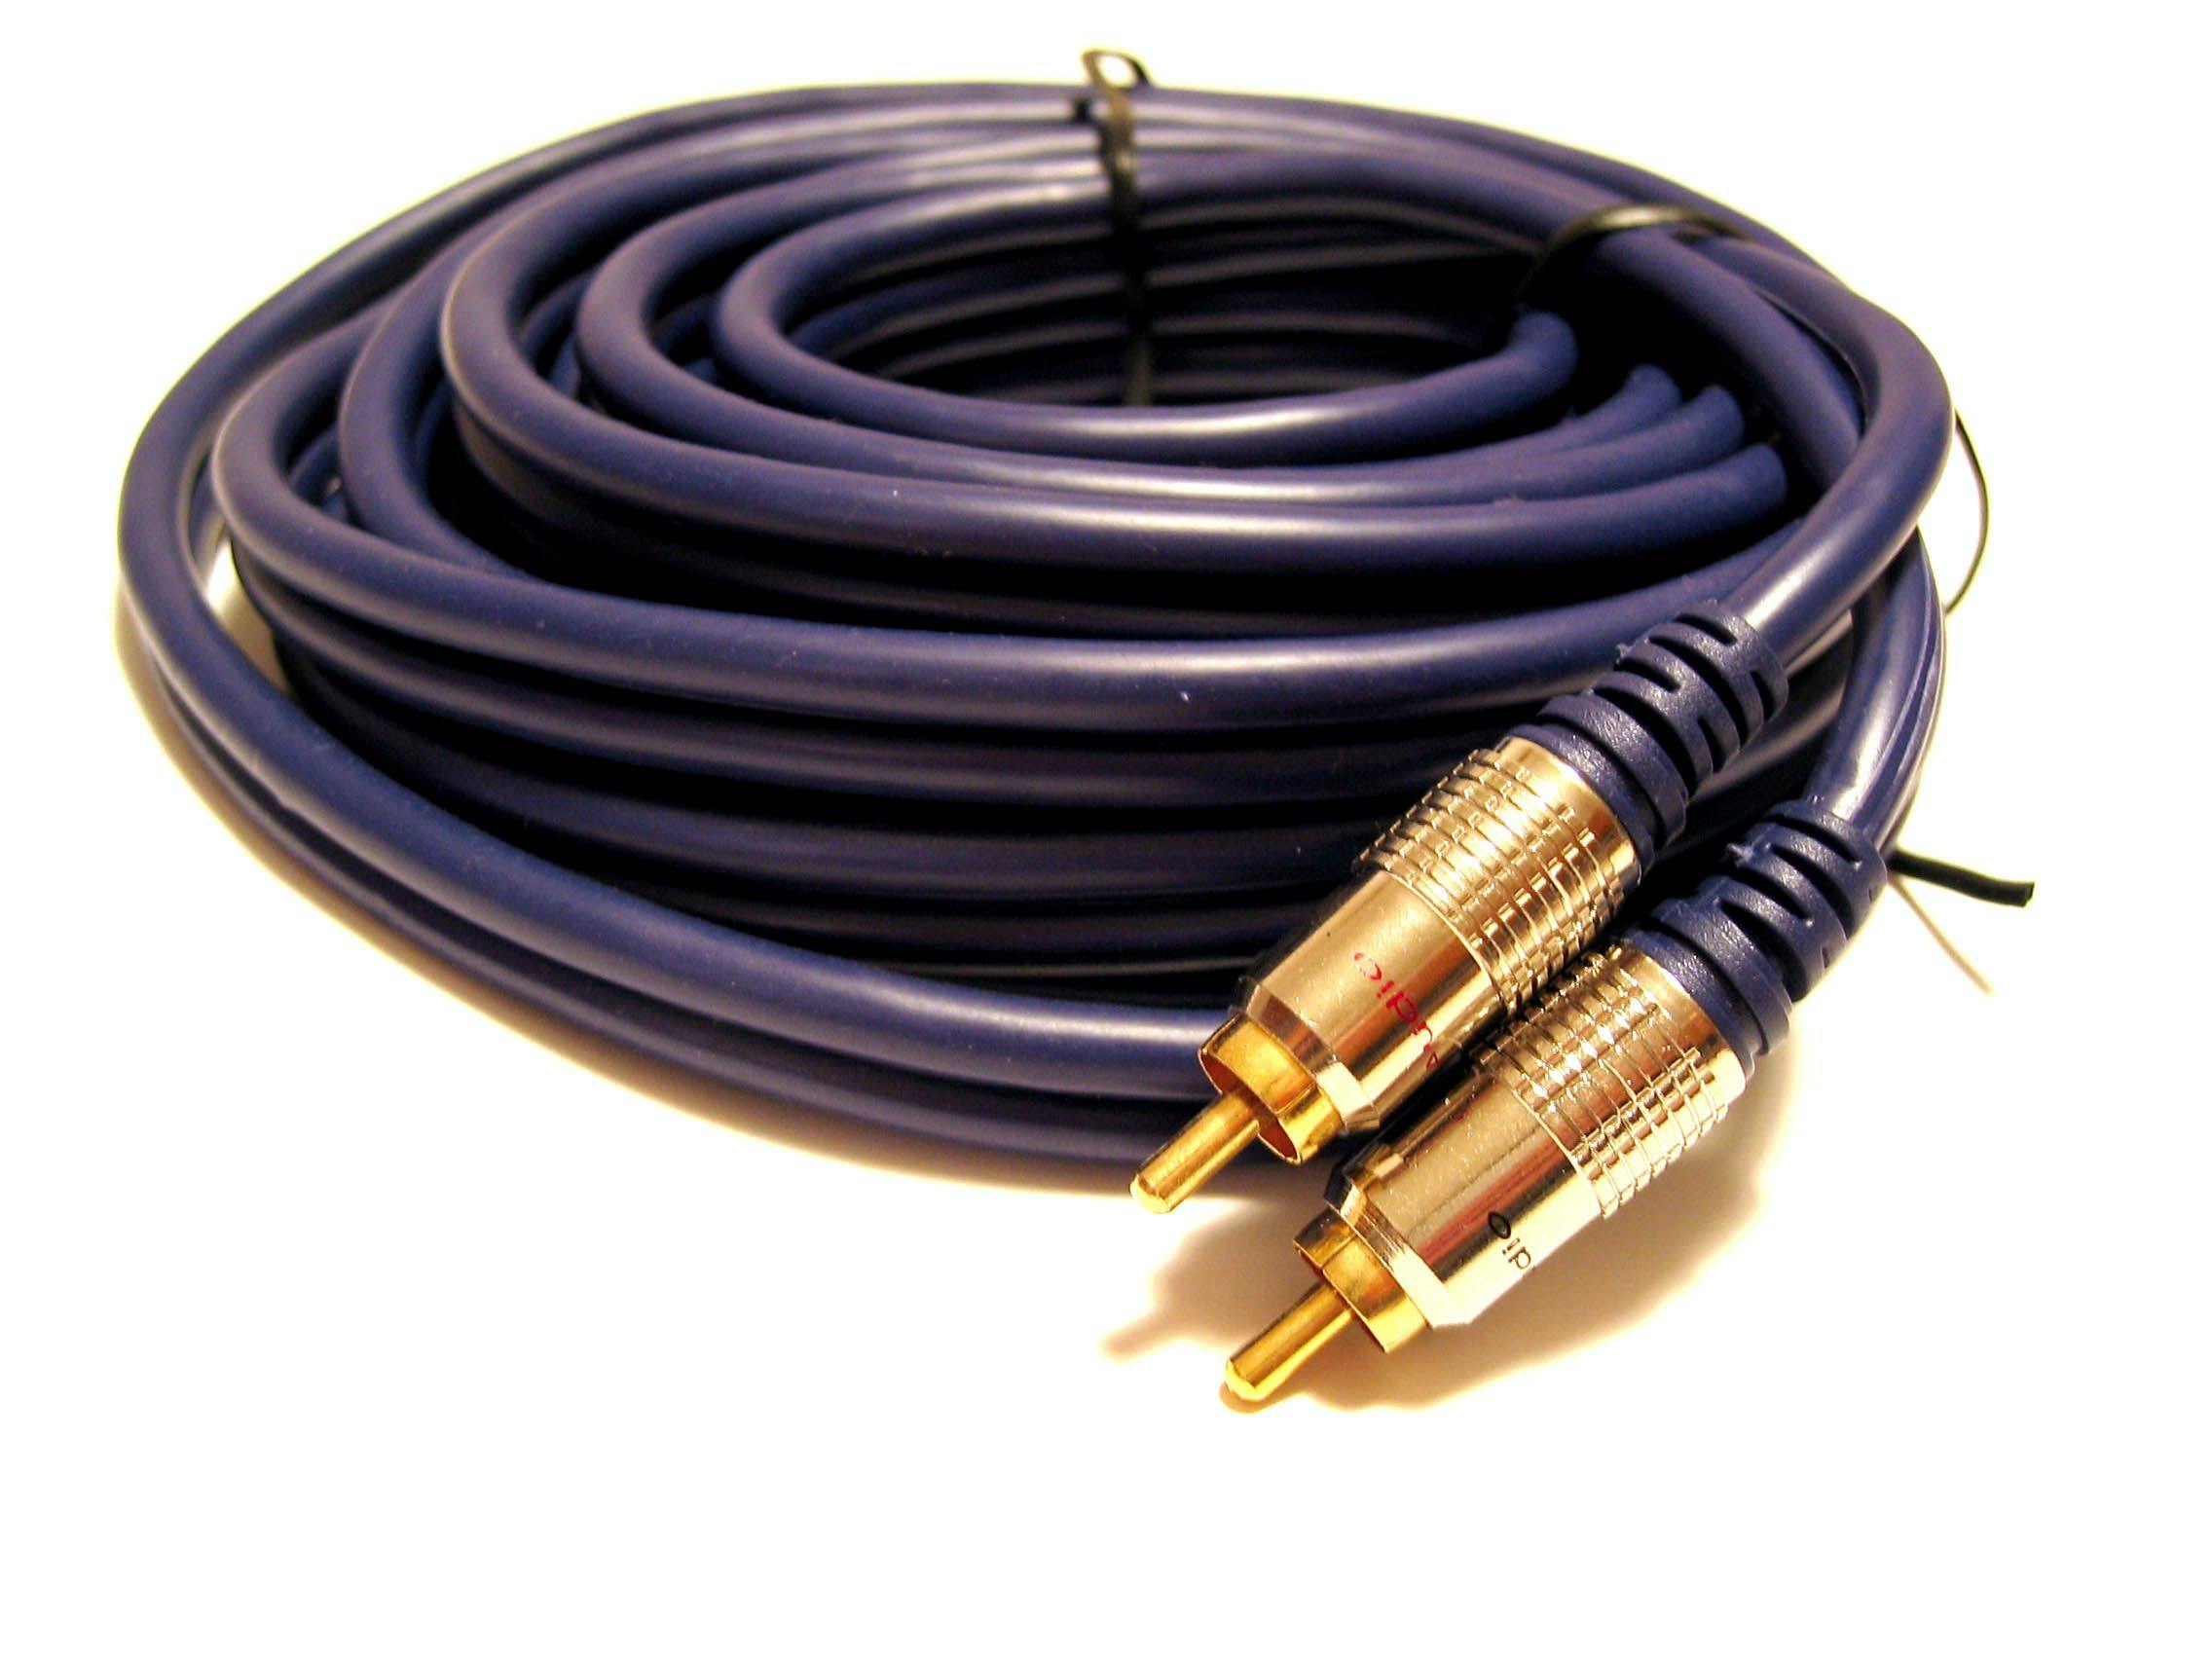 The Big Question About Speaker Cables: Do They Make a Difference?